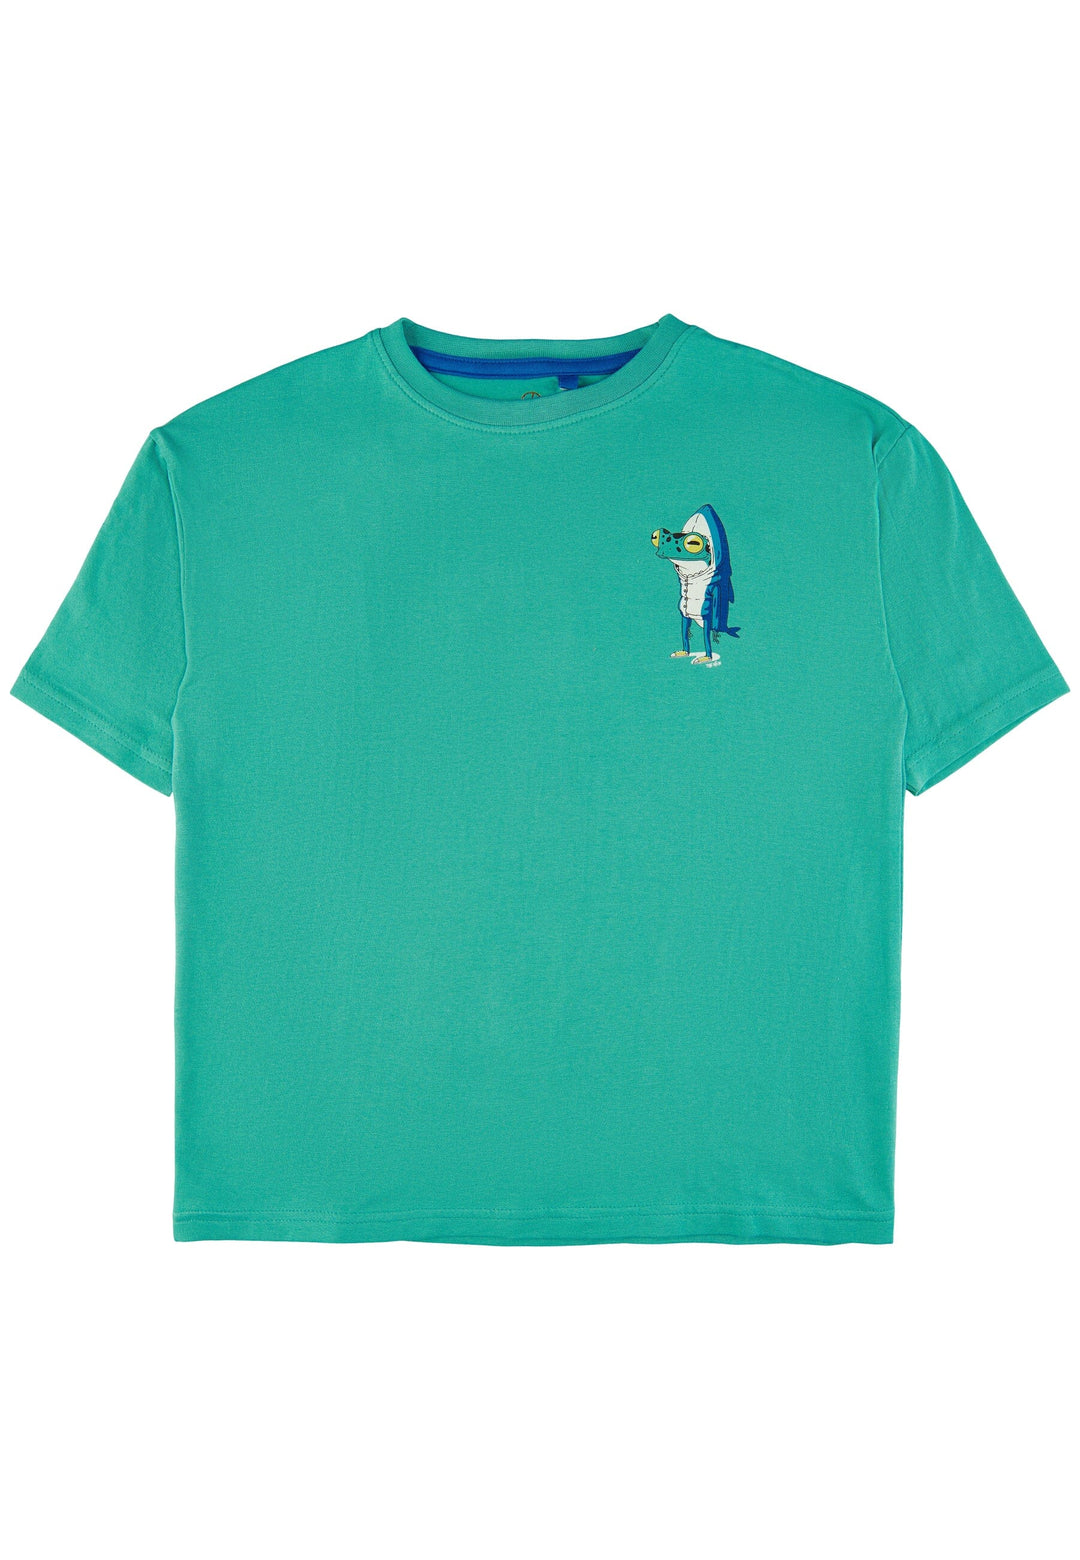 The New - Tnguro S_S Tee - Agate Green T-shirts 